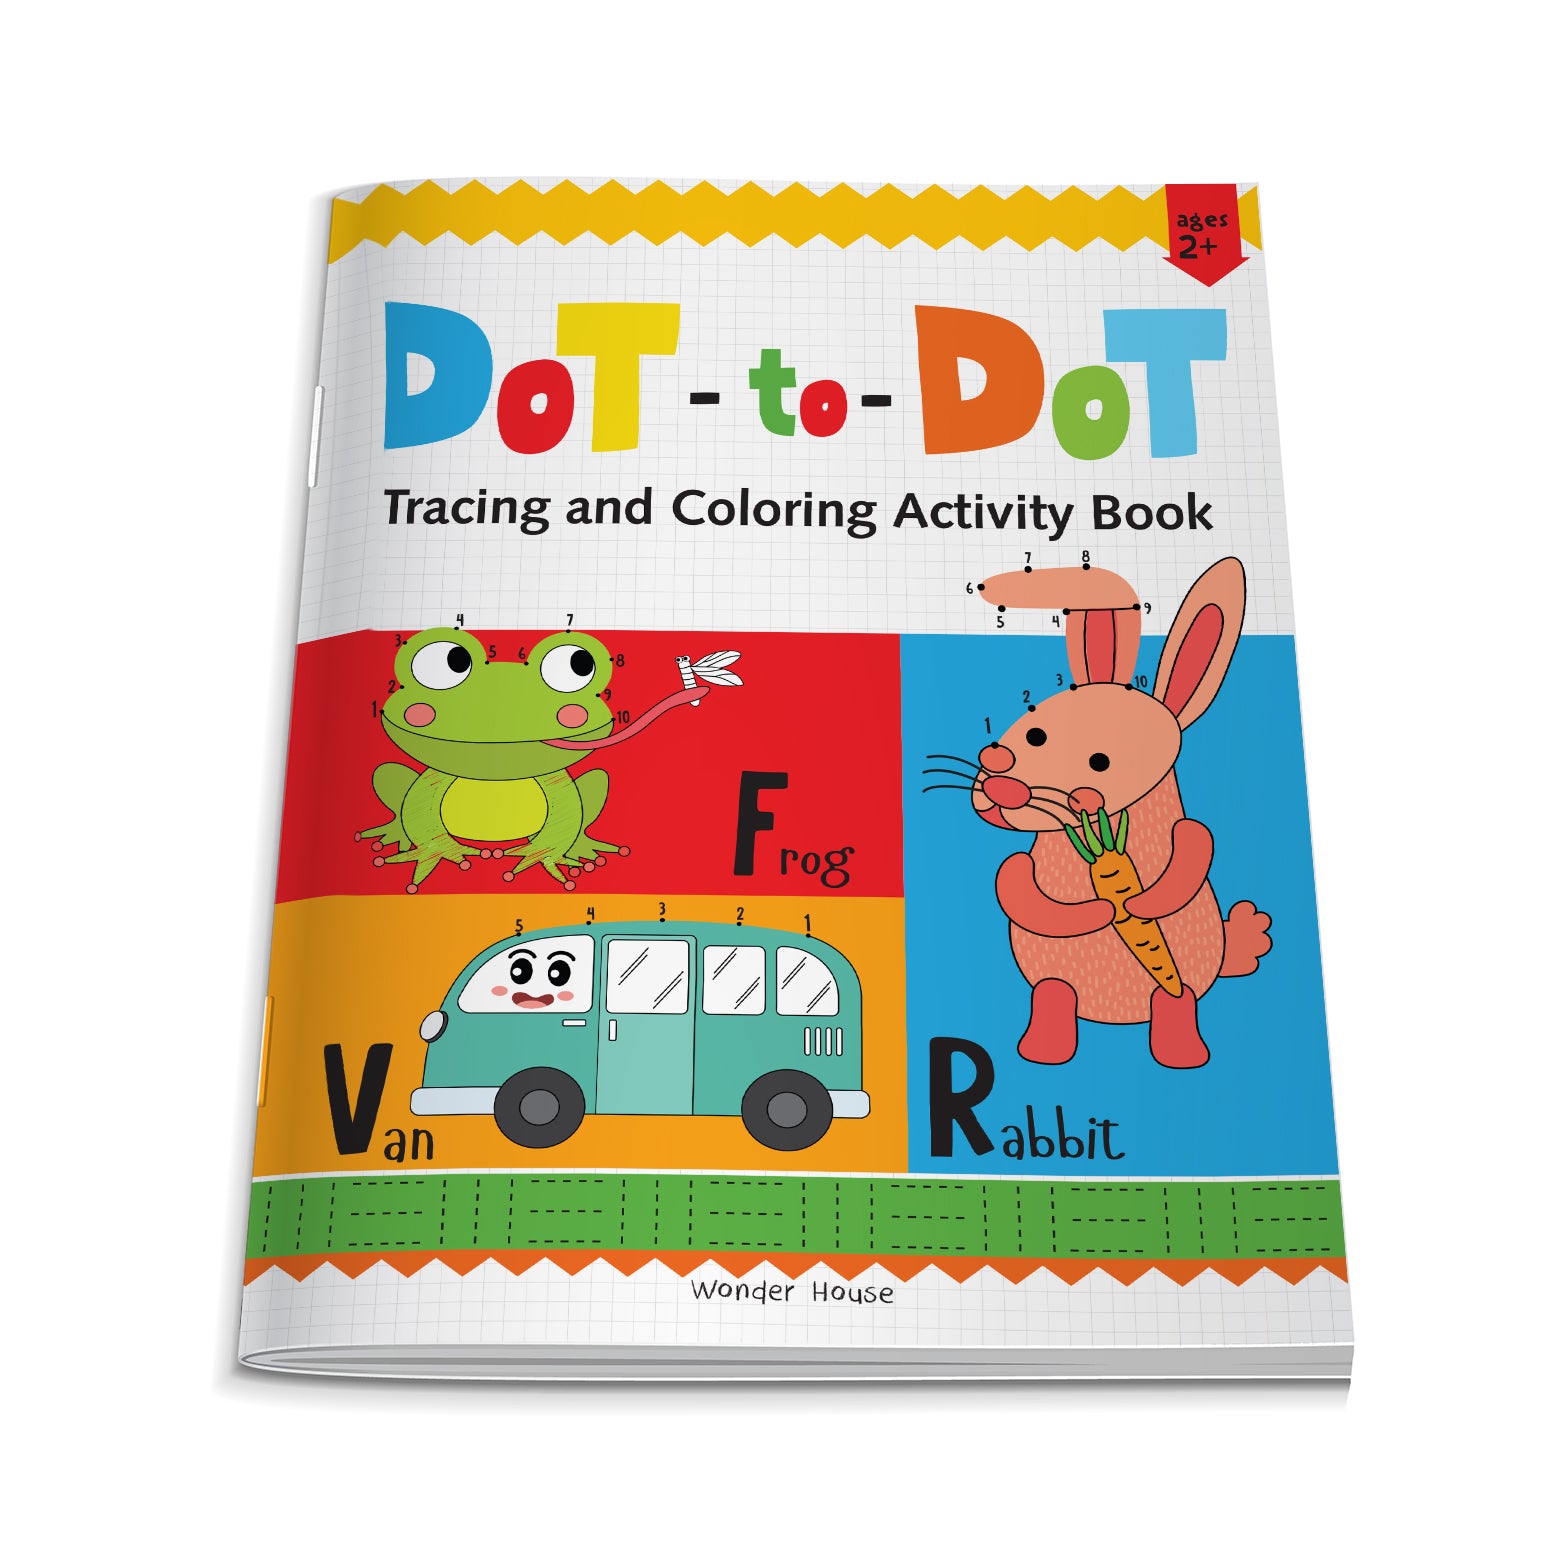 Preschool Activity Book: Dot-To-Dot - Tracing and Coloring Activity Book For Kids